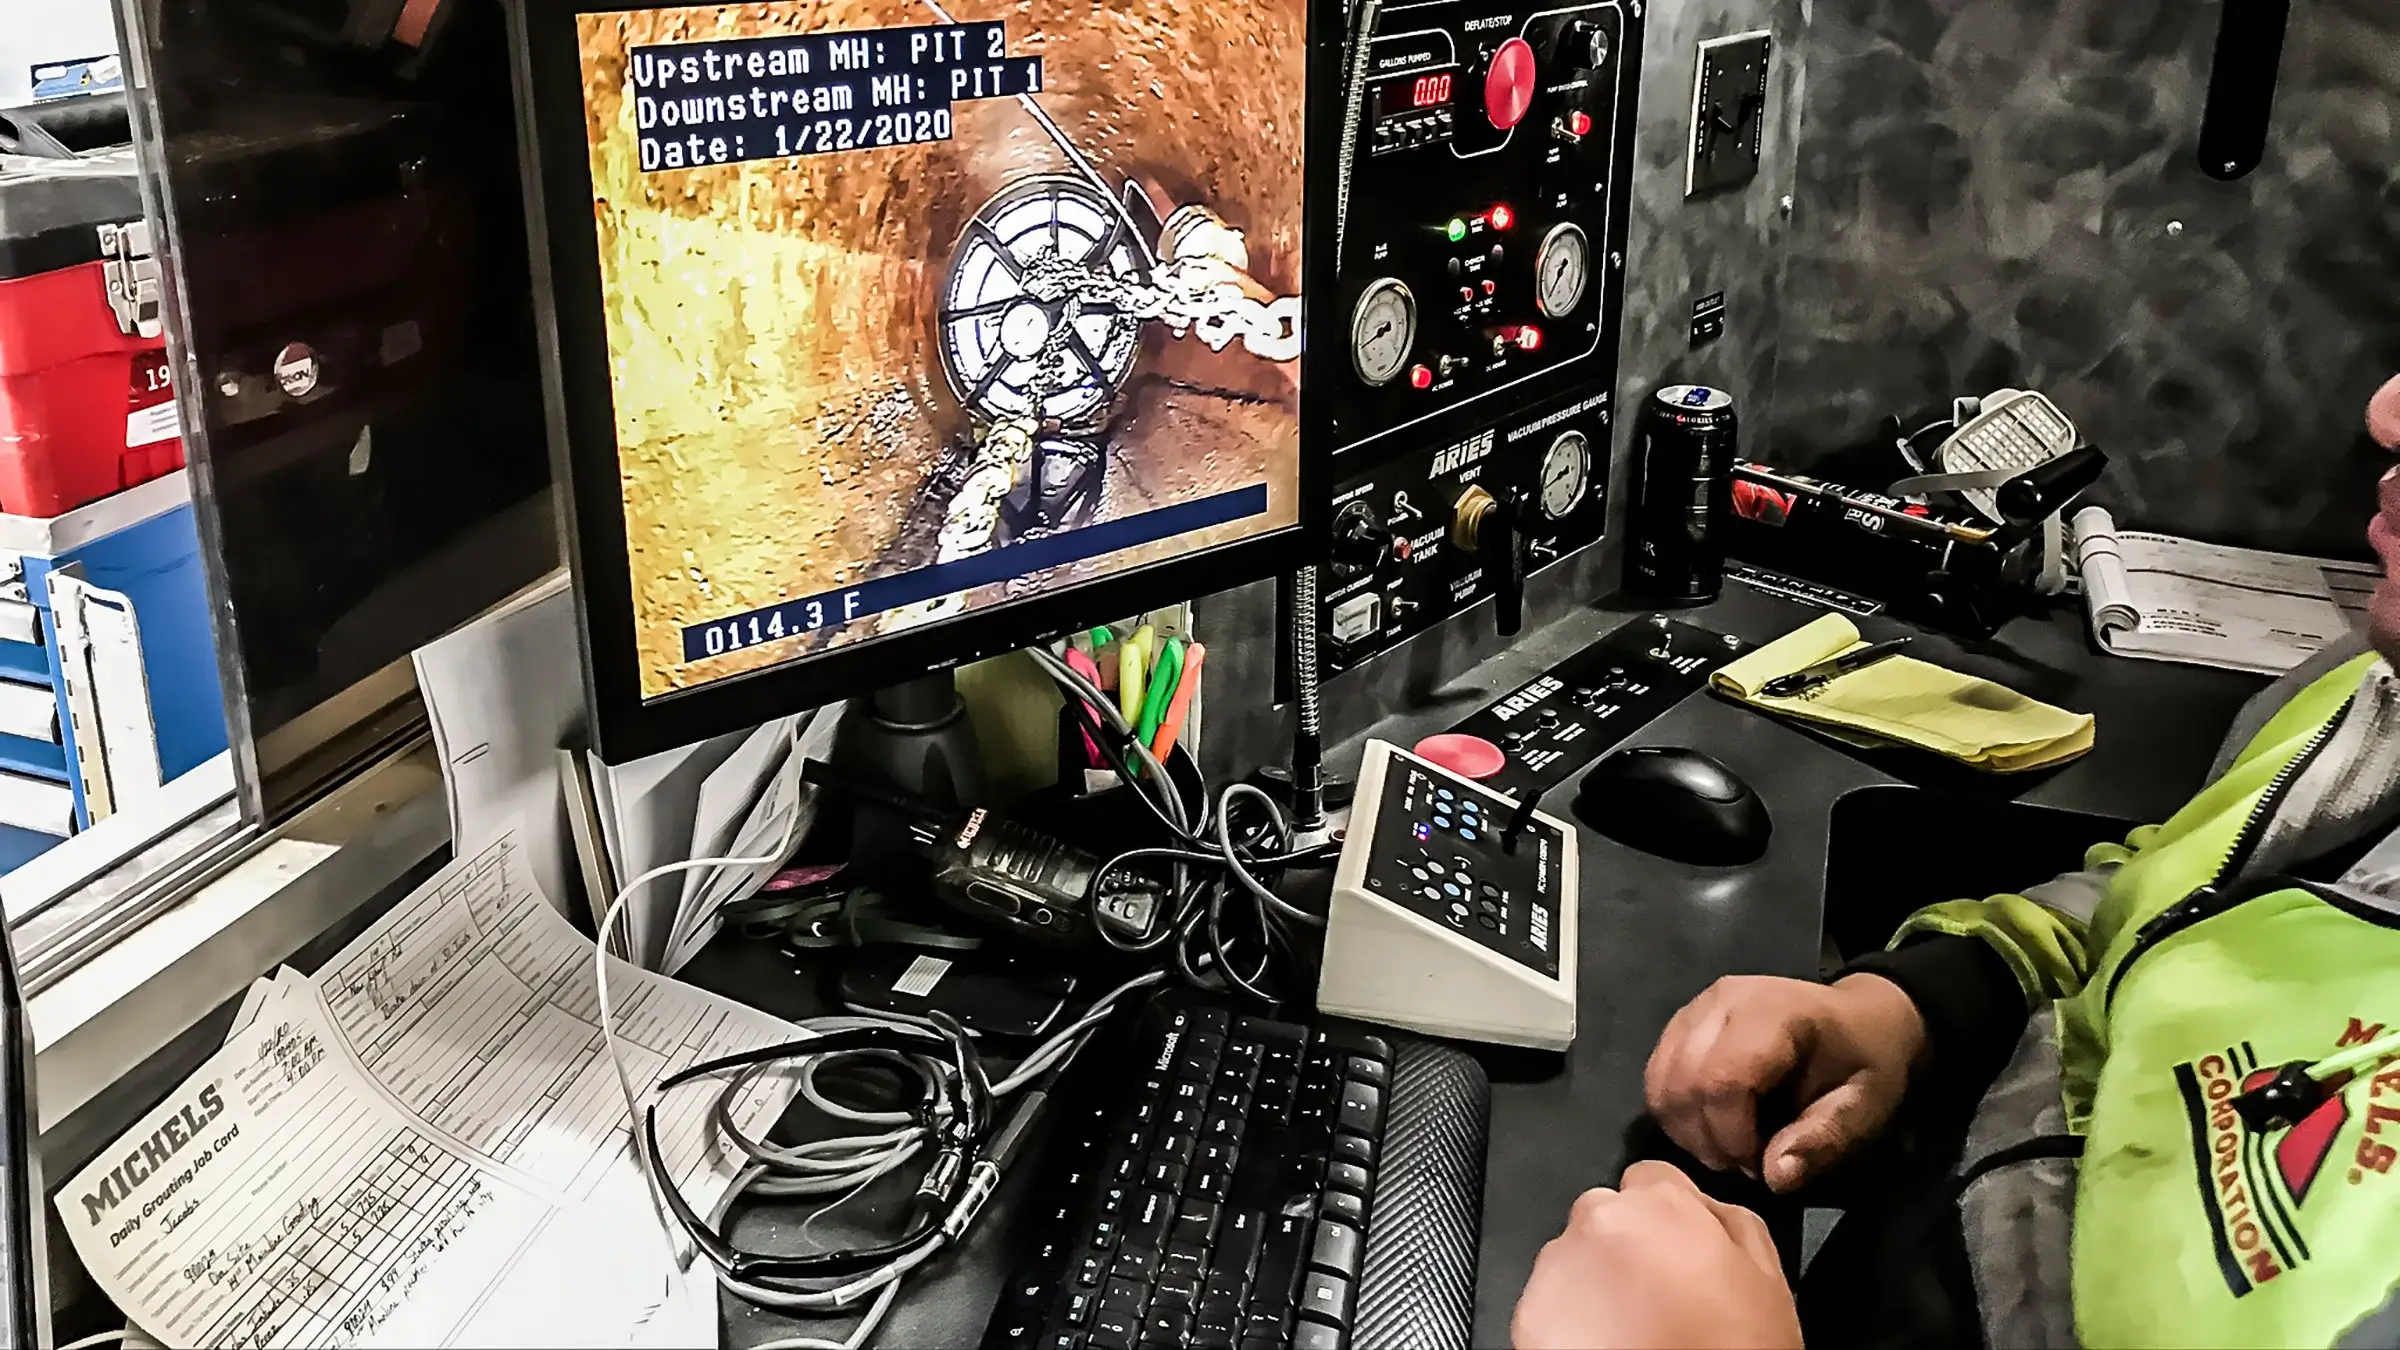 A crew member observes a sewer rehabilitation job from a monitor